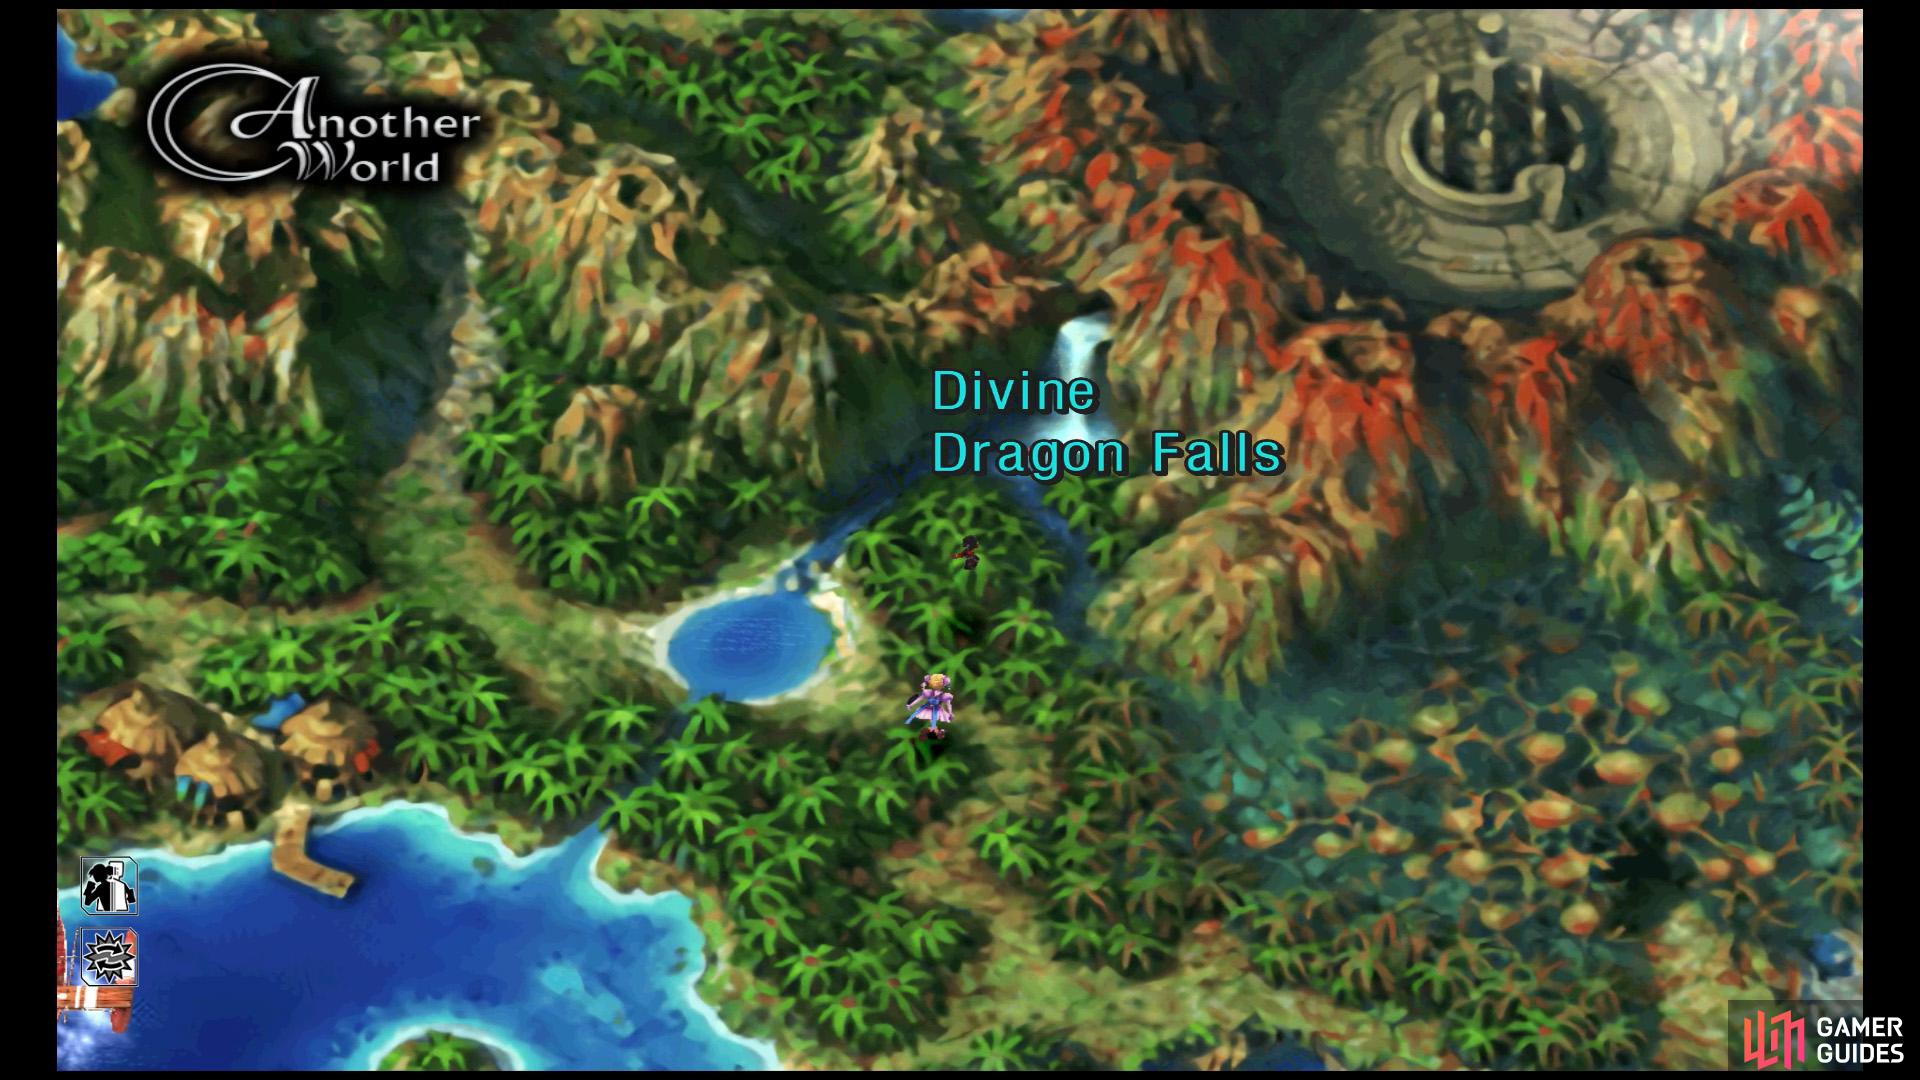 It's easy to miss, but here's the location of Divine Dragon Falls.